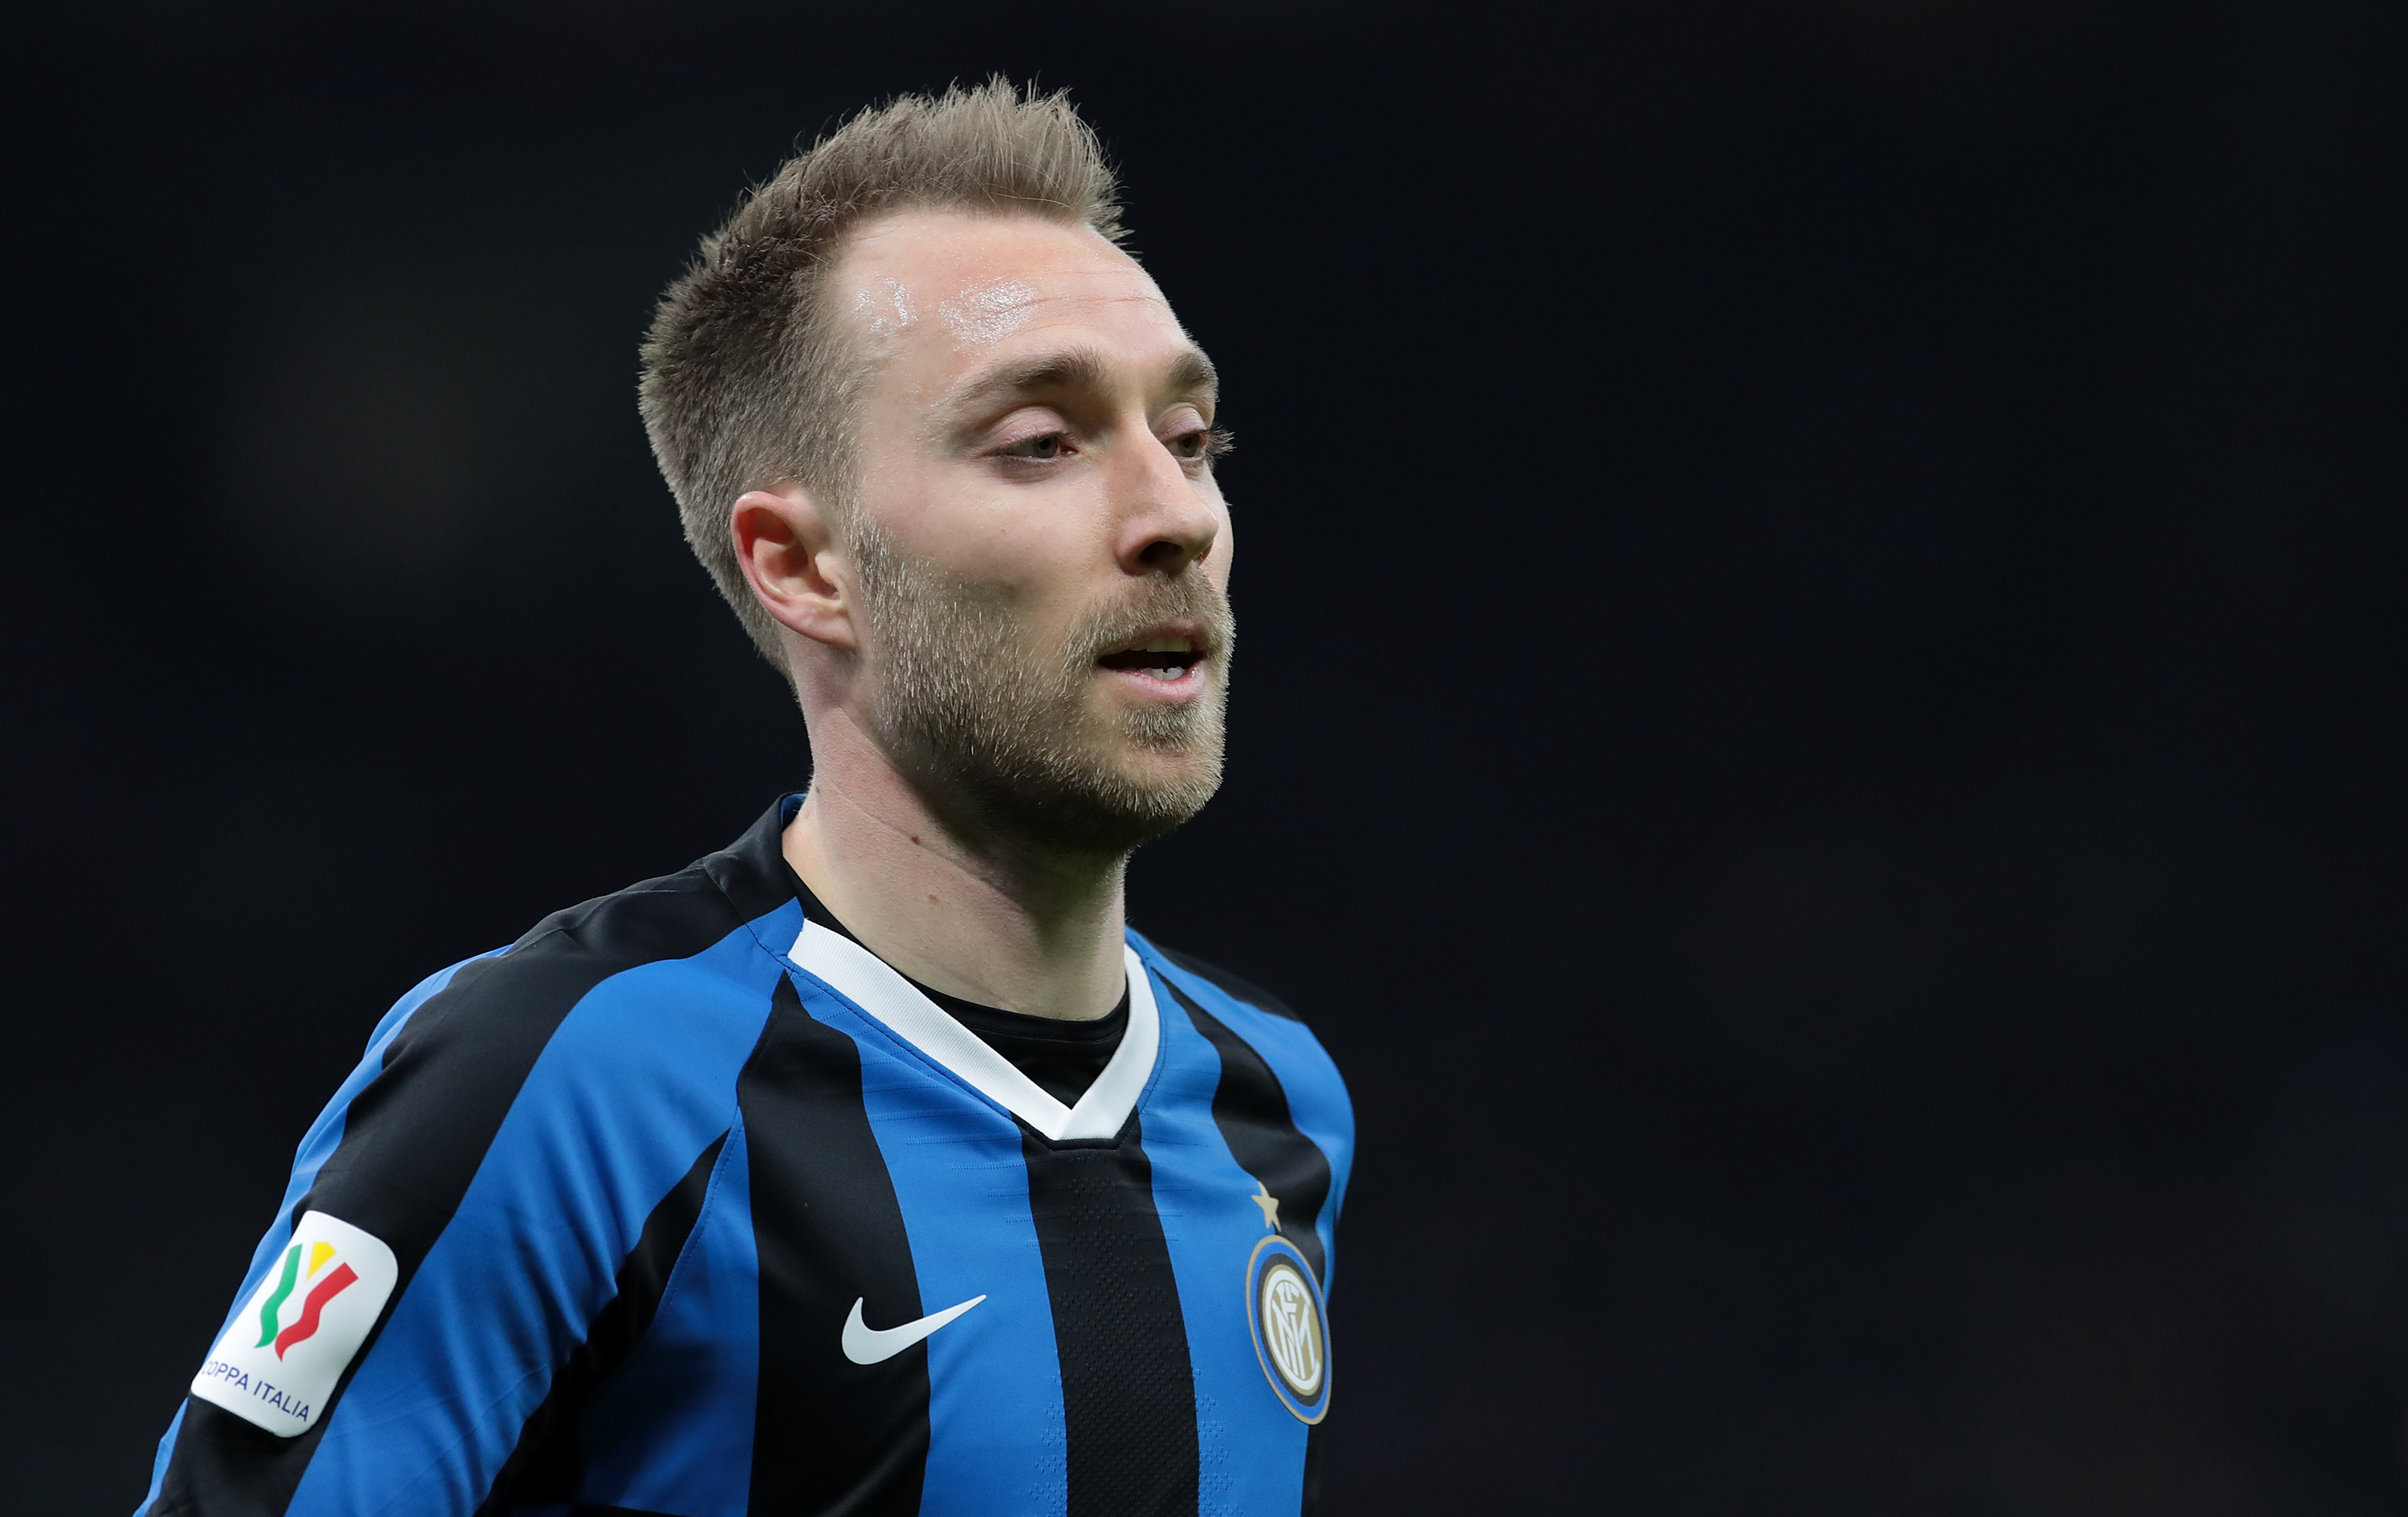 Christian Eriksen could start for Inter, despite the uncertainty surrounding his future (Photo by Emilio Andreoli/Getty Images)